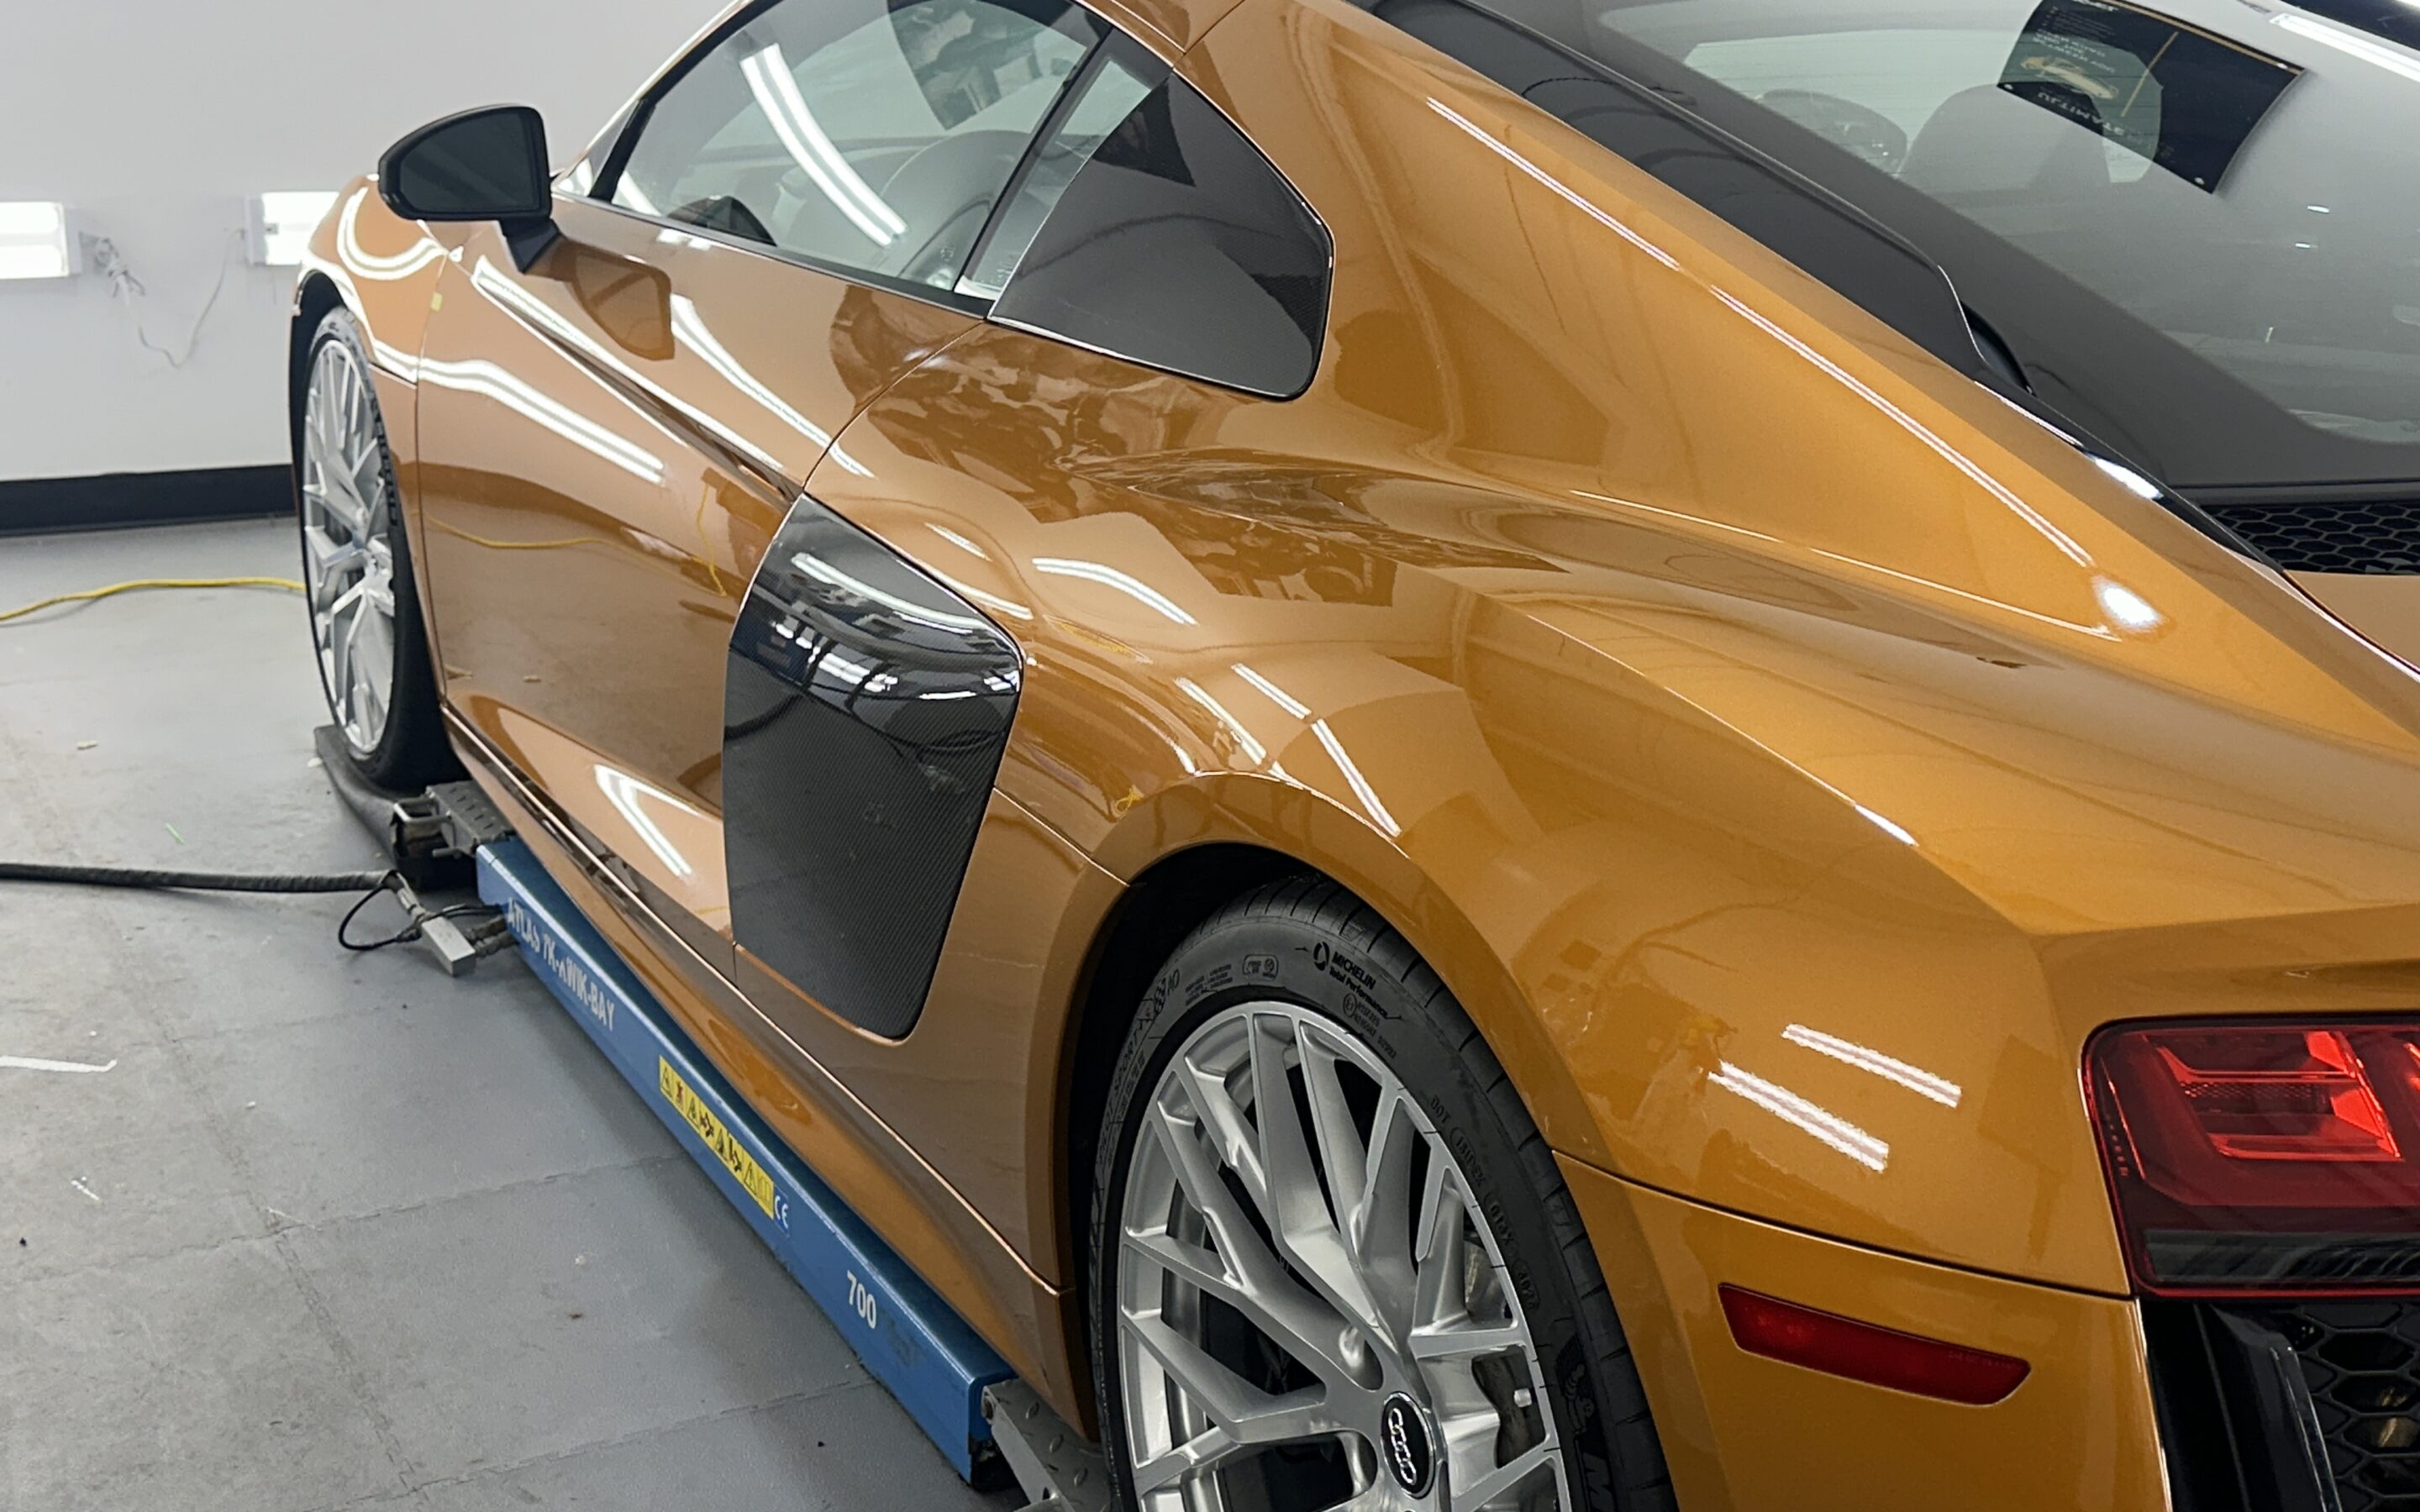 Paint Protection Film (PPF) of a 2016 Audi R8